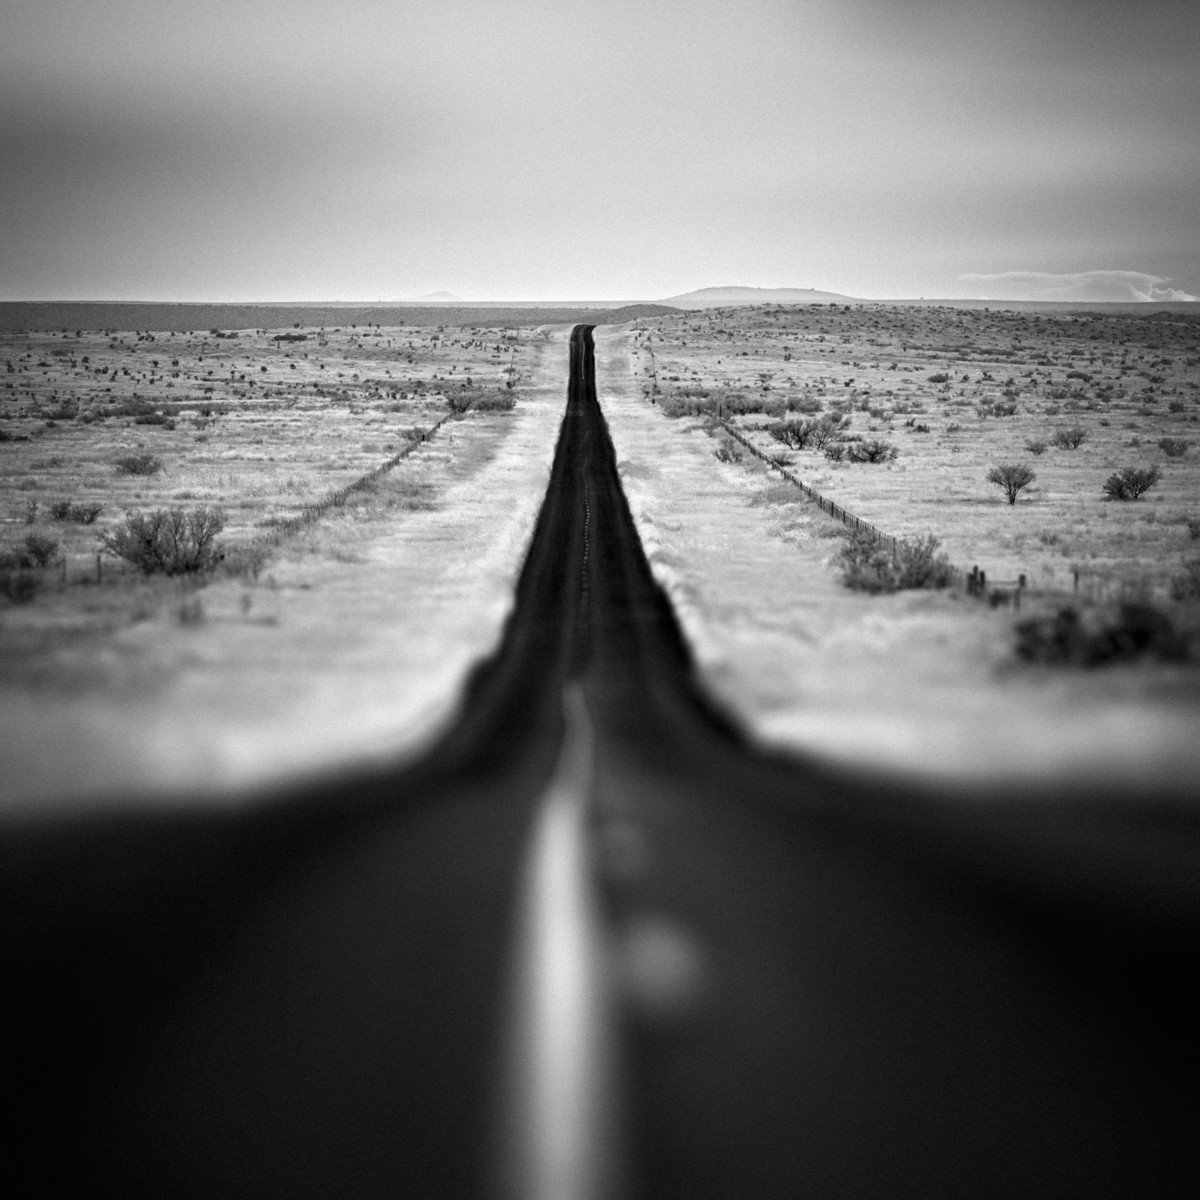 RR 2810 from Marfa No. 1, 2019